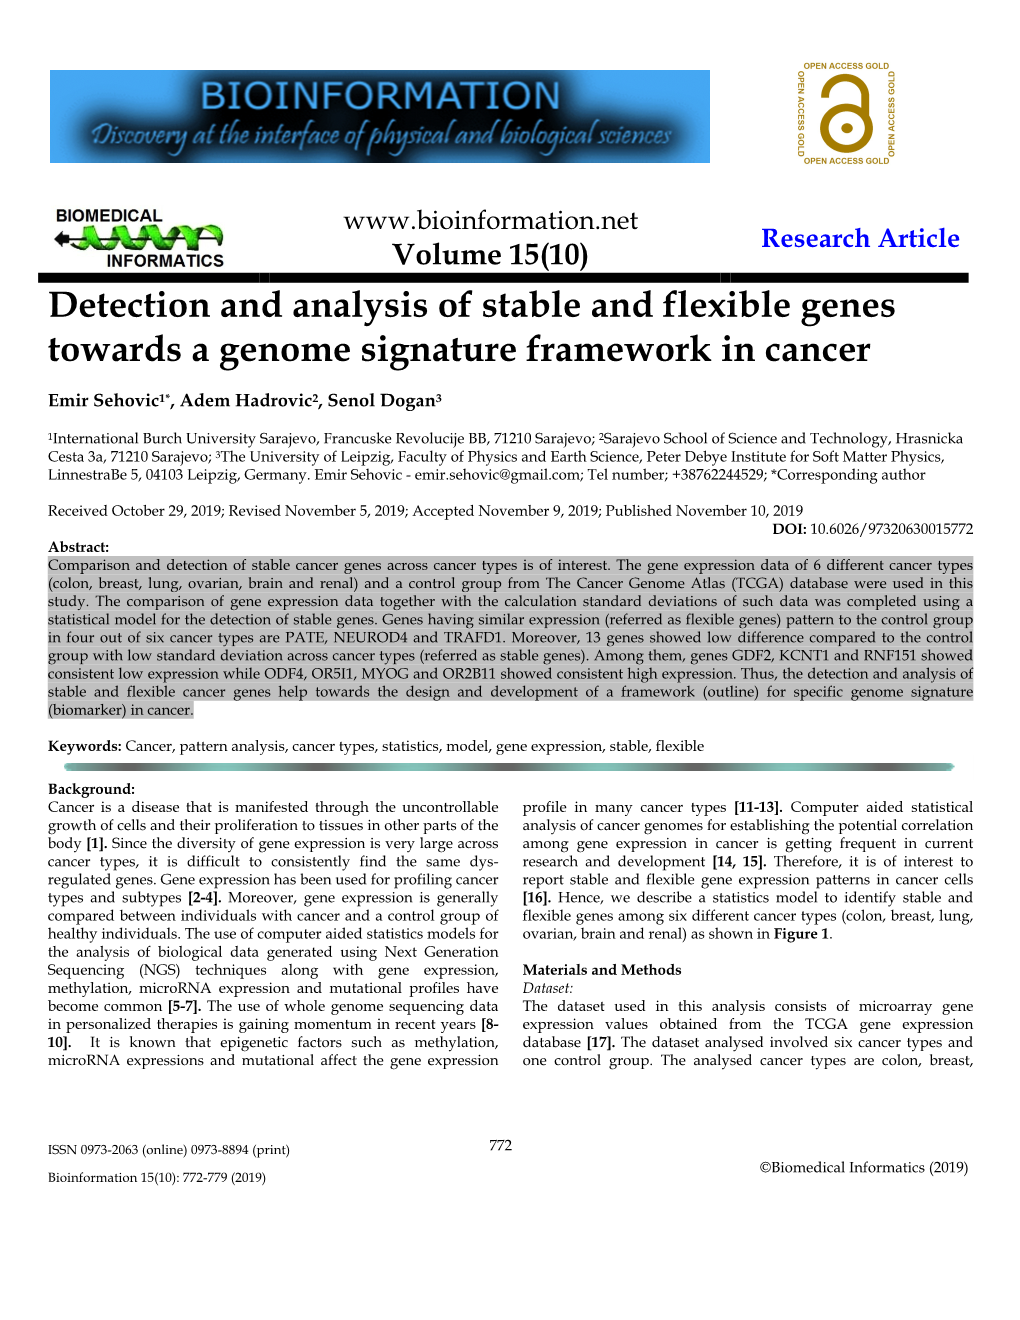 Detection and Analysis of Stable and Flexible Genes Towards a Genome Signature Framework in Cancer